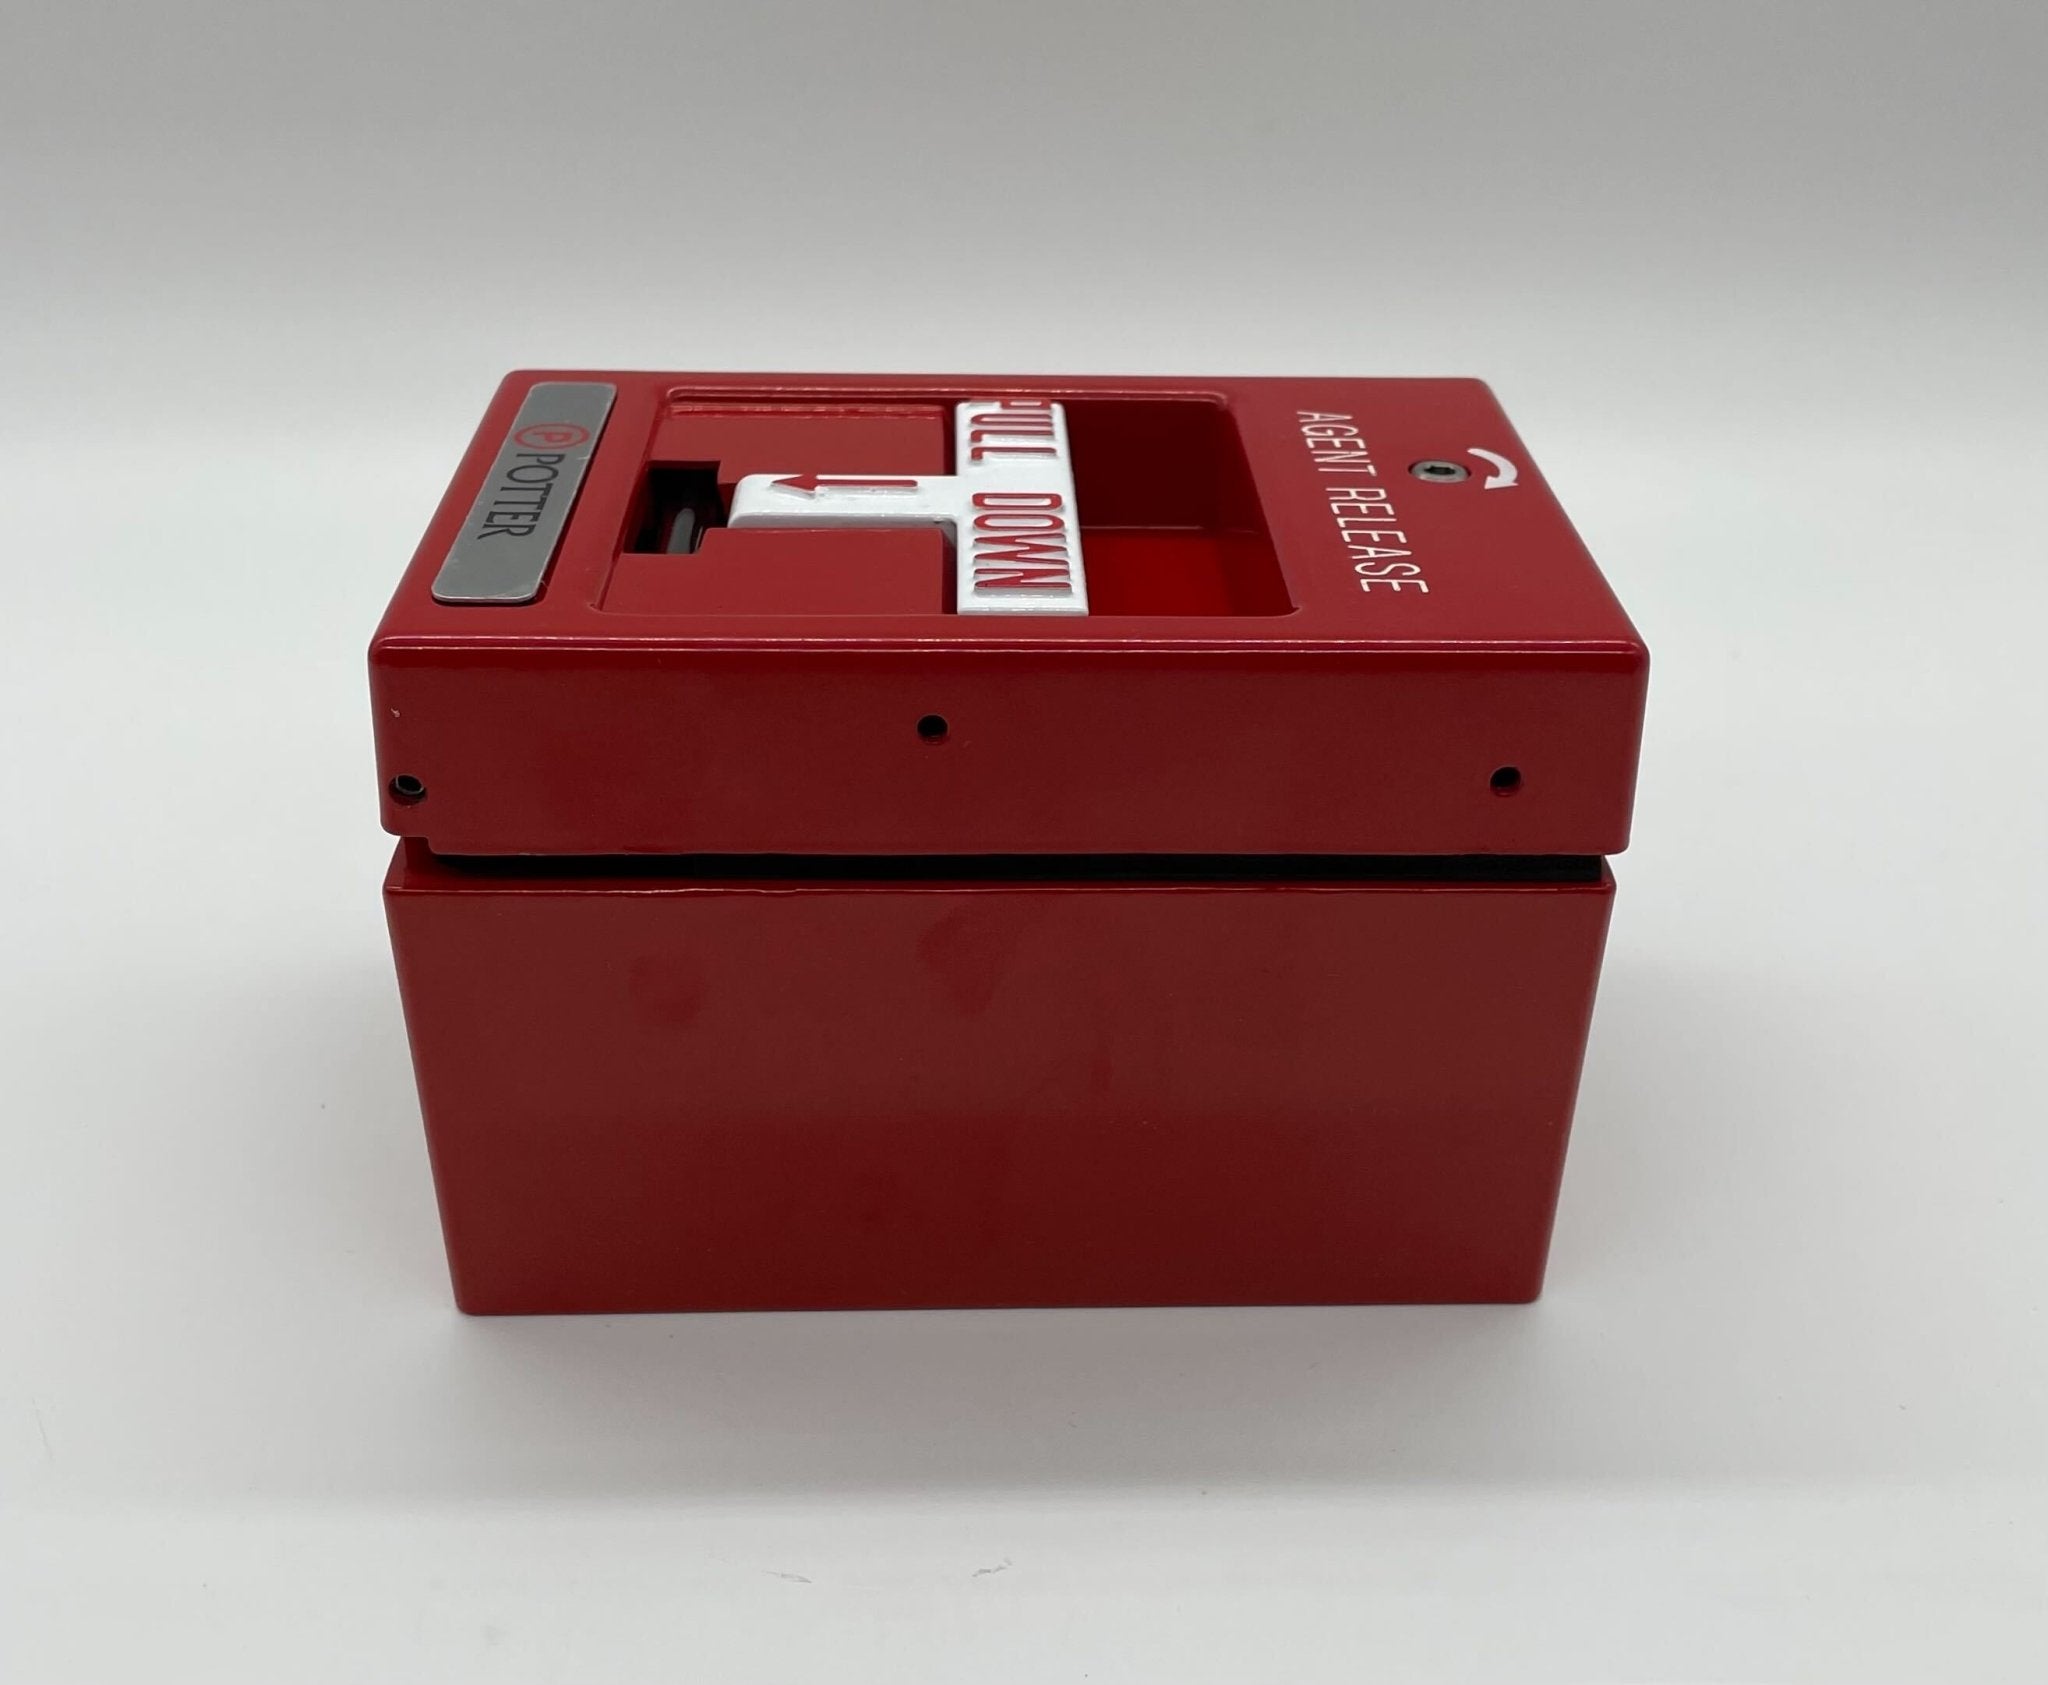 Potter RMS-1T-WP - The Fire Alarm Supplier